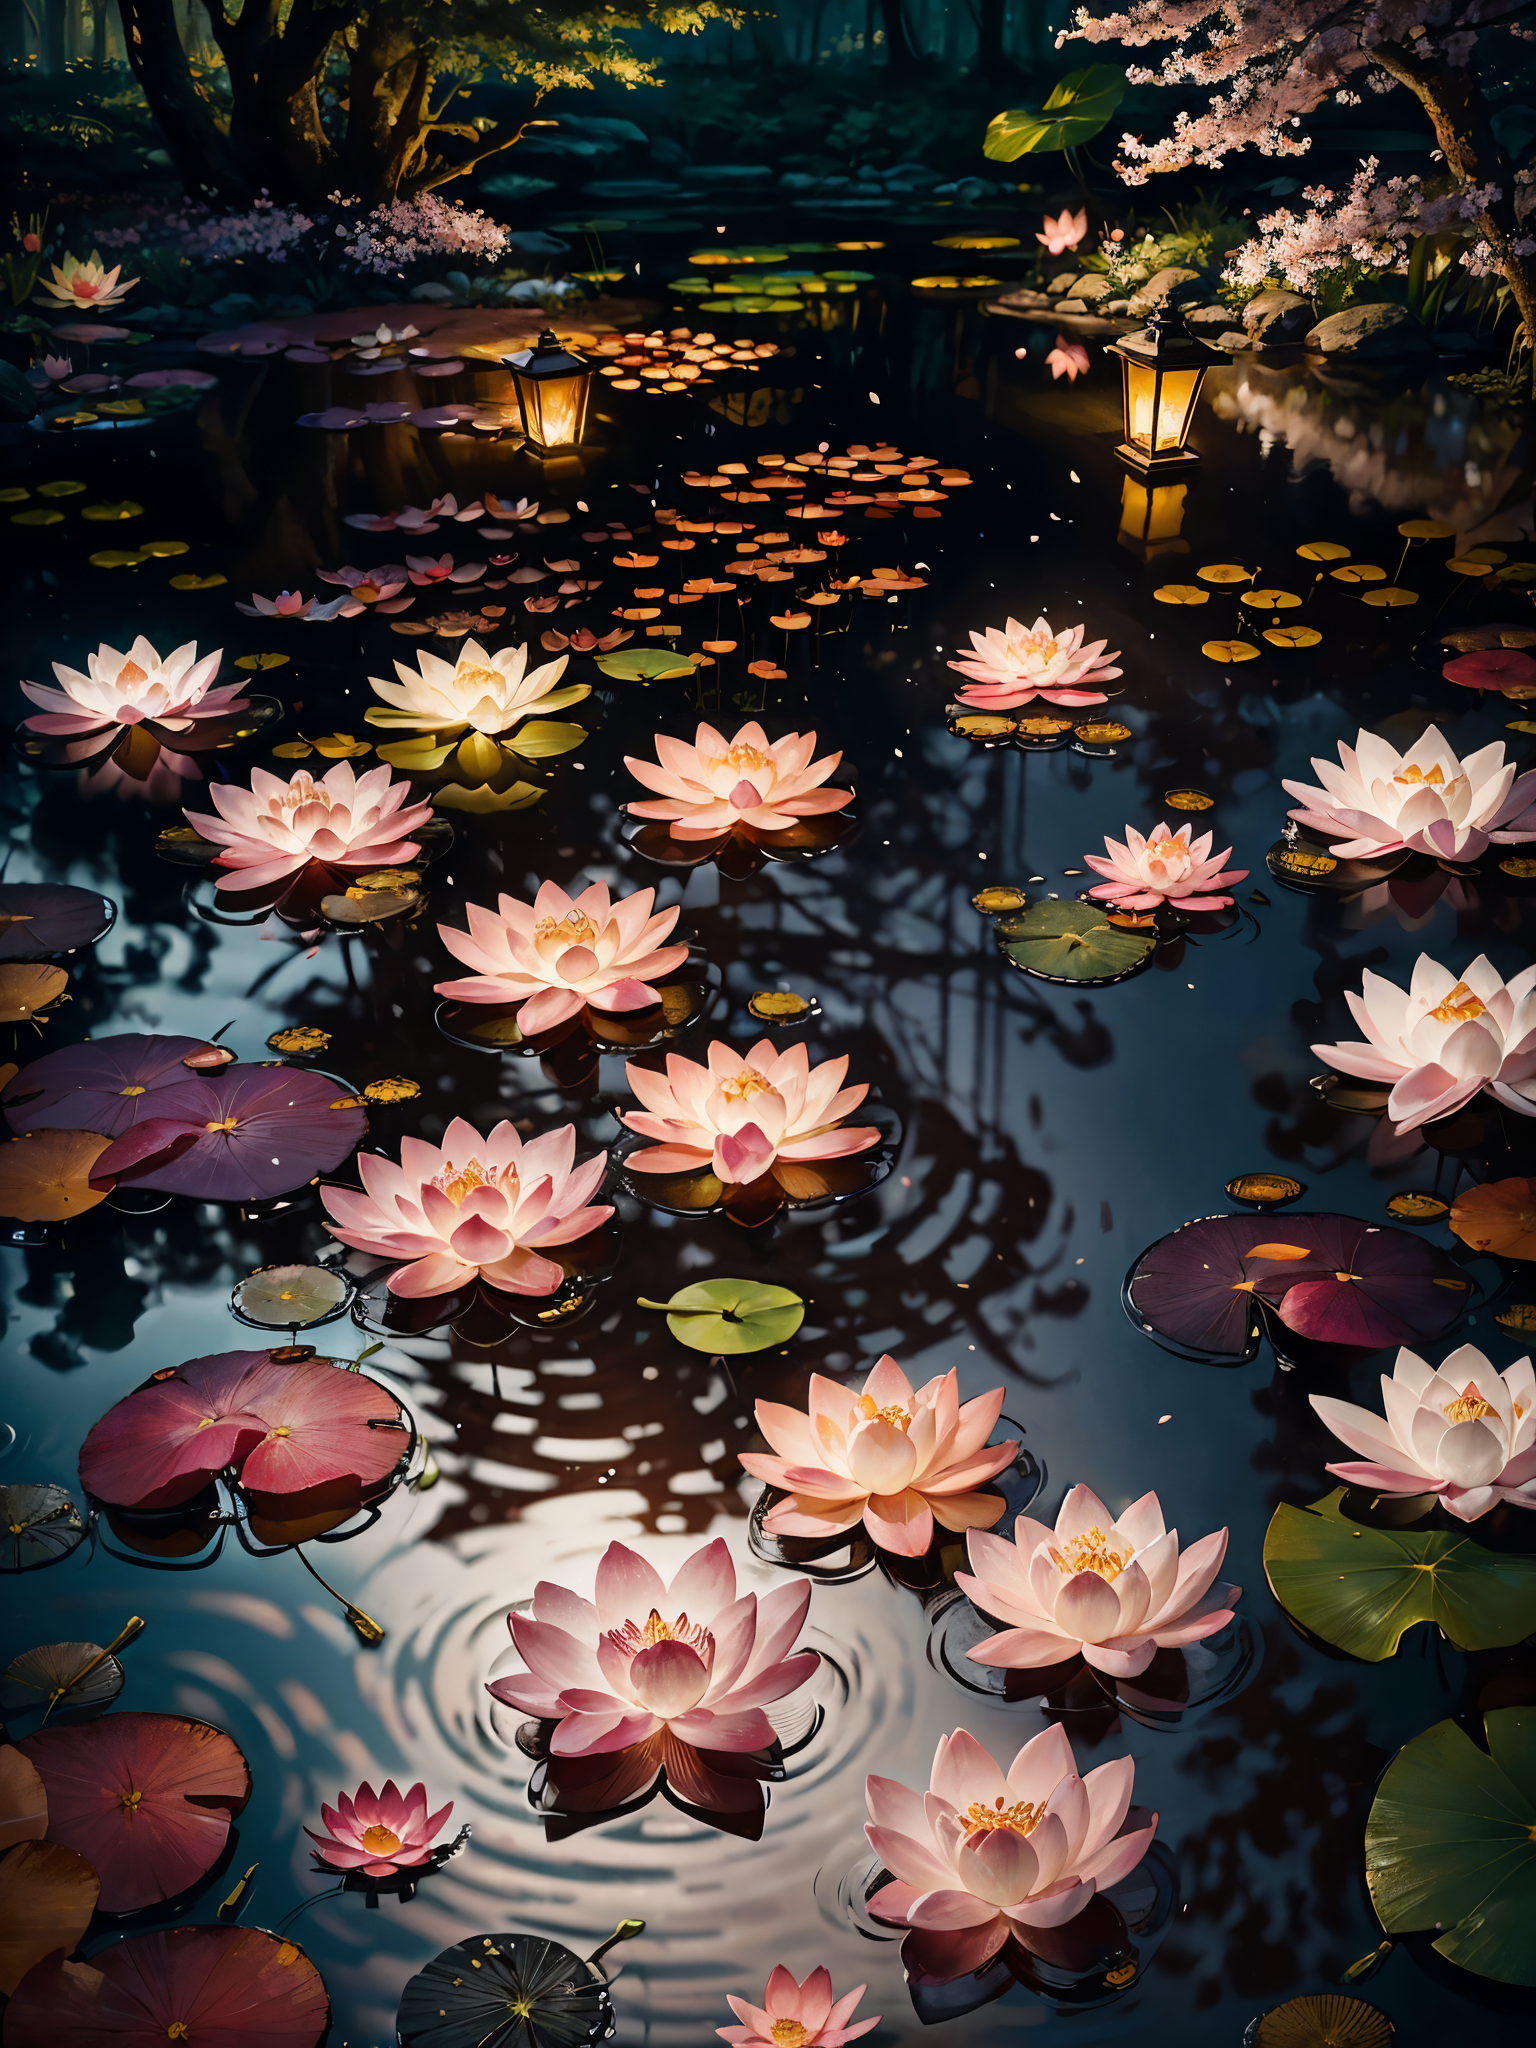 Masterpiece,highest quality,sharp focus,pond,shrine,clear water,flower bed with lanterns in background,dense forest,(lotus on the water),falling cherry blossom petals,glowing butterflies,fireflies,bioluminescent,photo,color grading,by lee jeffries,nikon d850,film stock photograph 4,kodak portra 400,f 1.6, rich colors,ultra-realistic,lifelike textures,dramatic lighting,unreal engine,cinestill 800